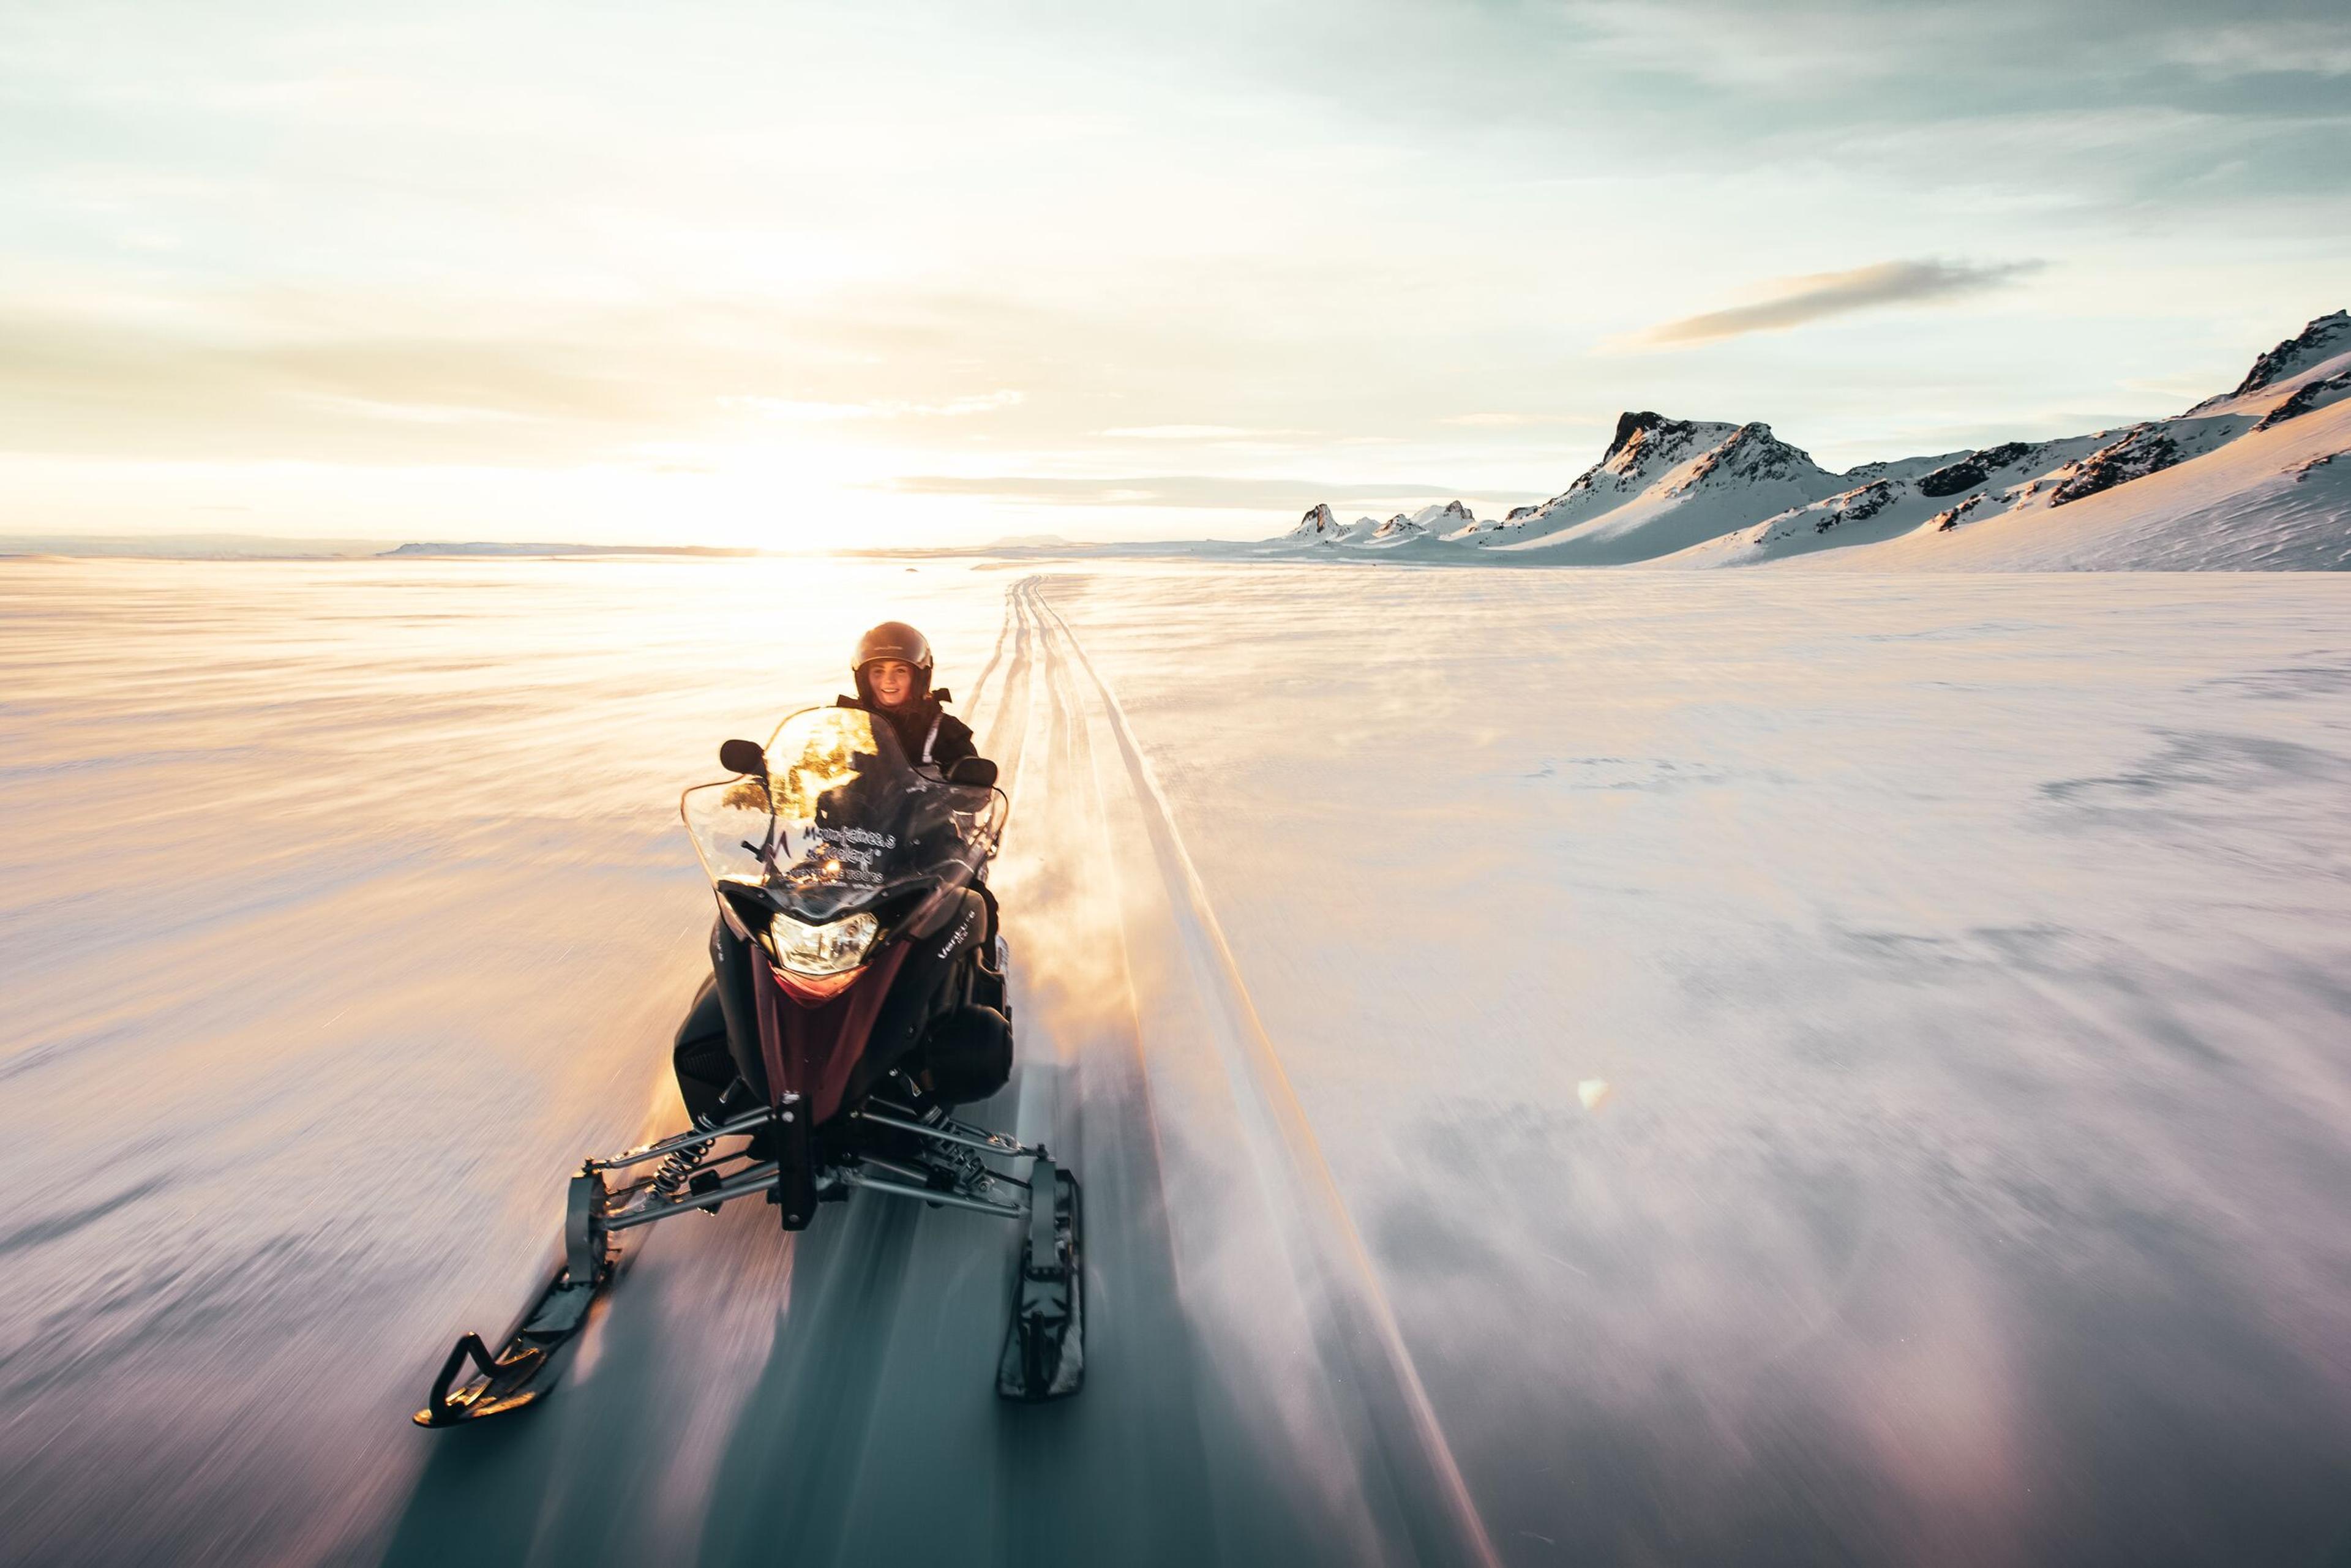 Tourist riding a snowmobile on Langjökull glacier in Iceland.